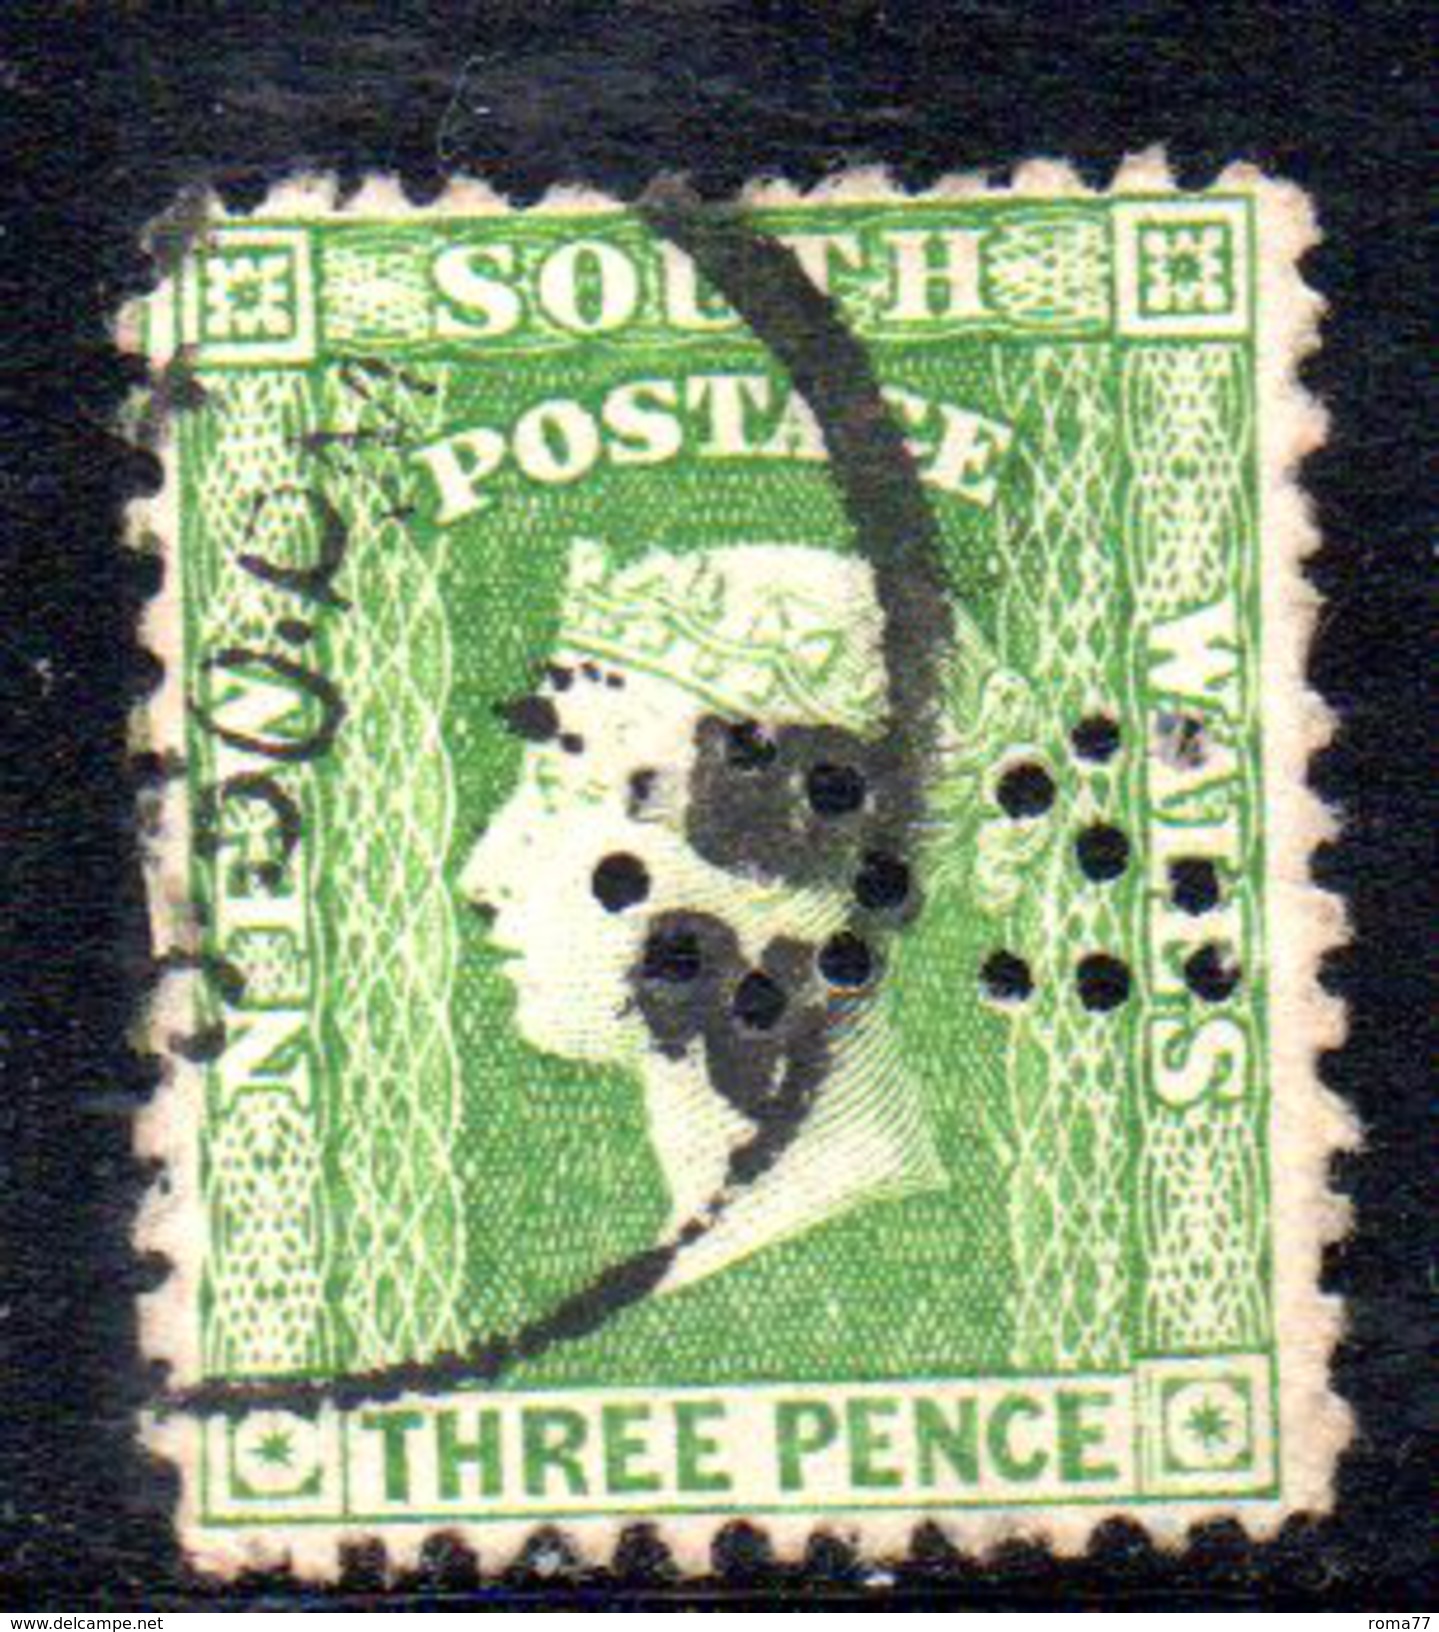 T1747 - NEW SOUTH WALES 3 Pence   Used . Punctured OS. - Used Stamps